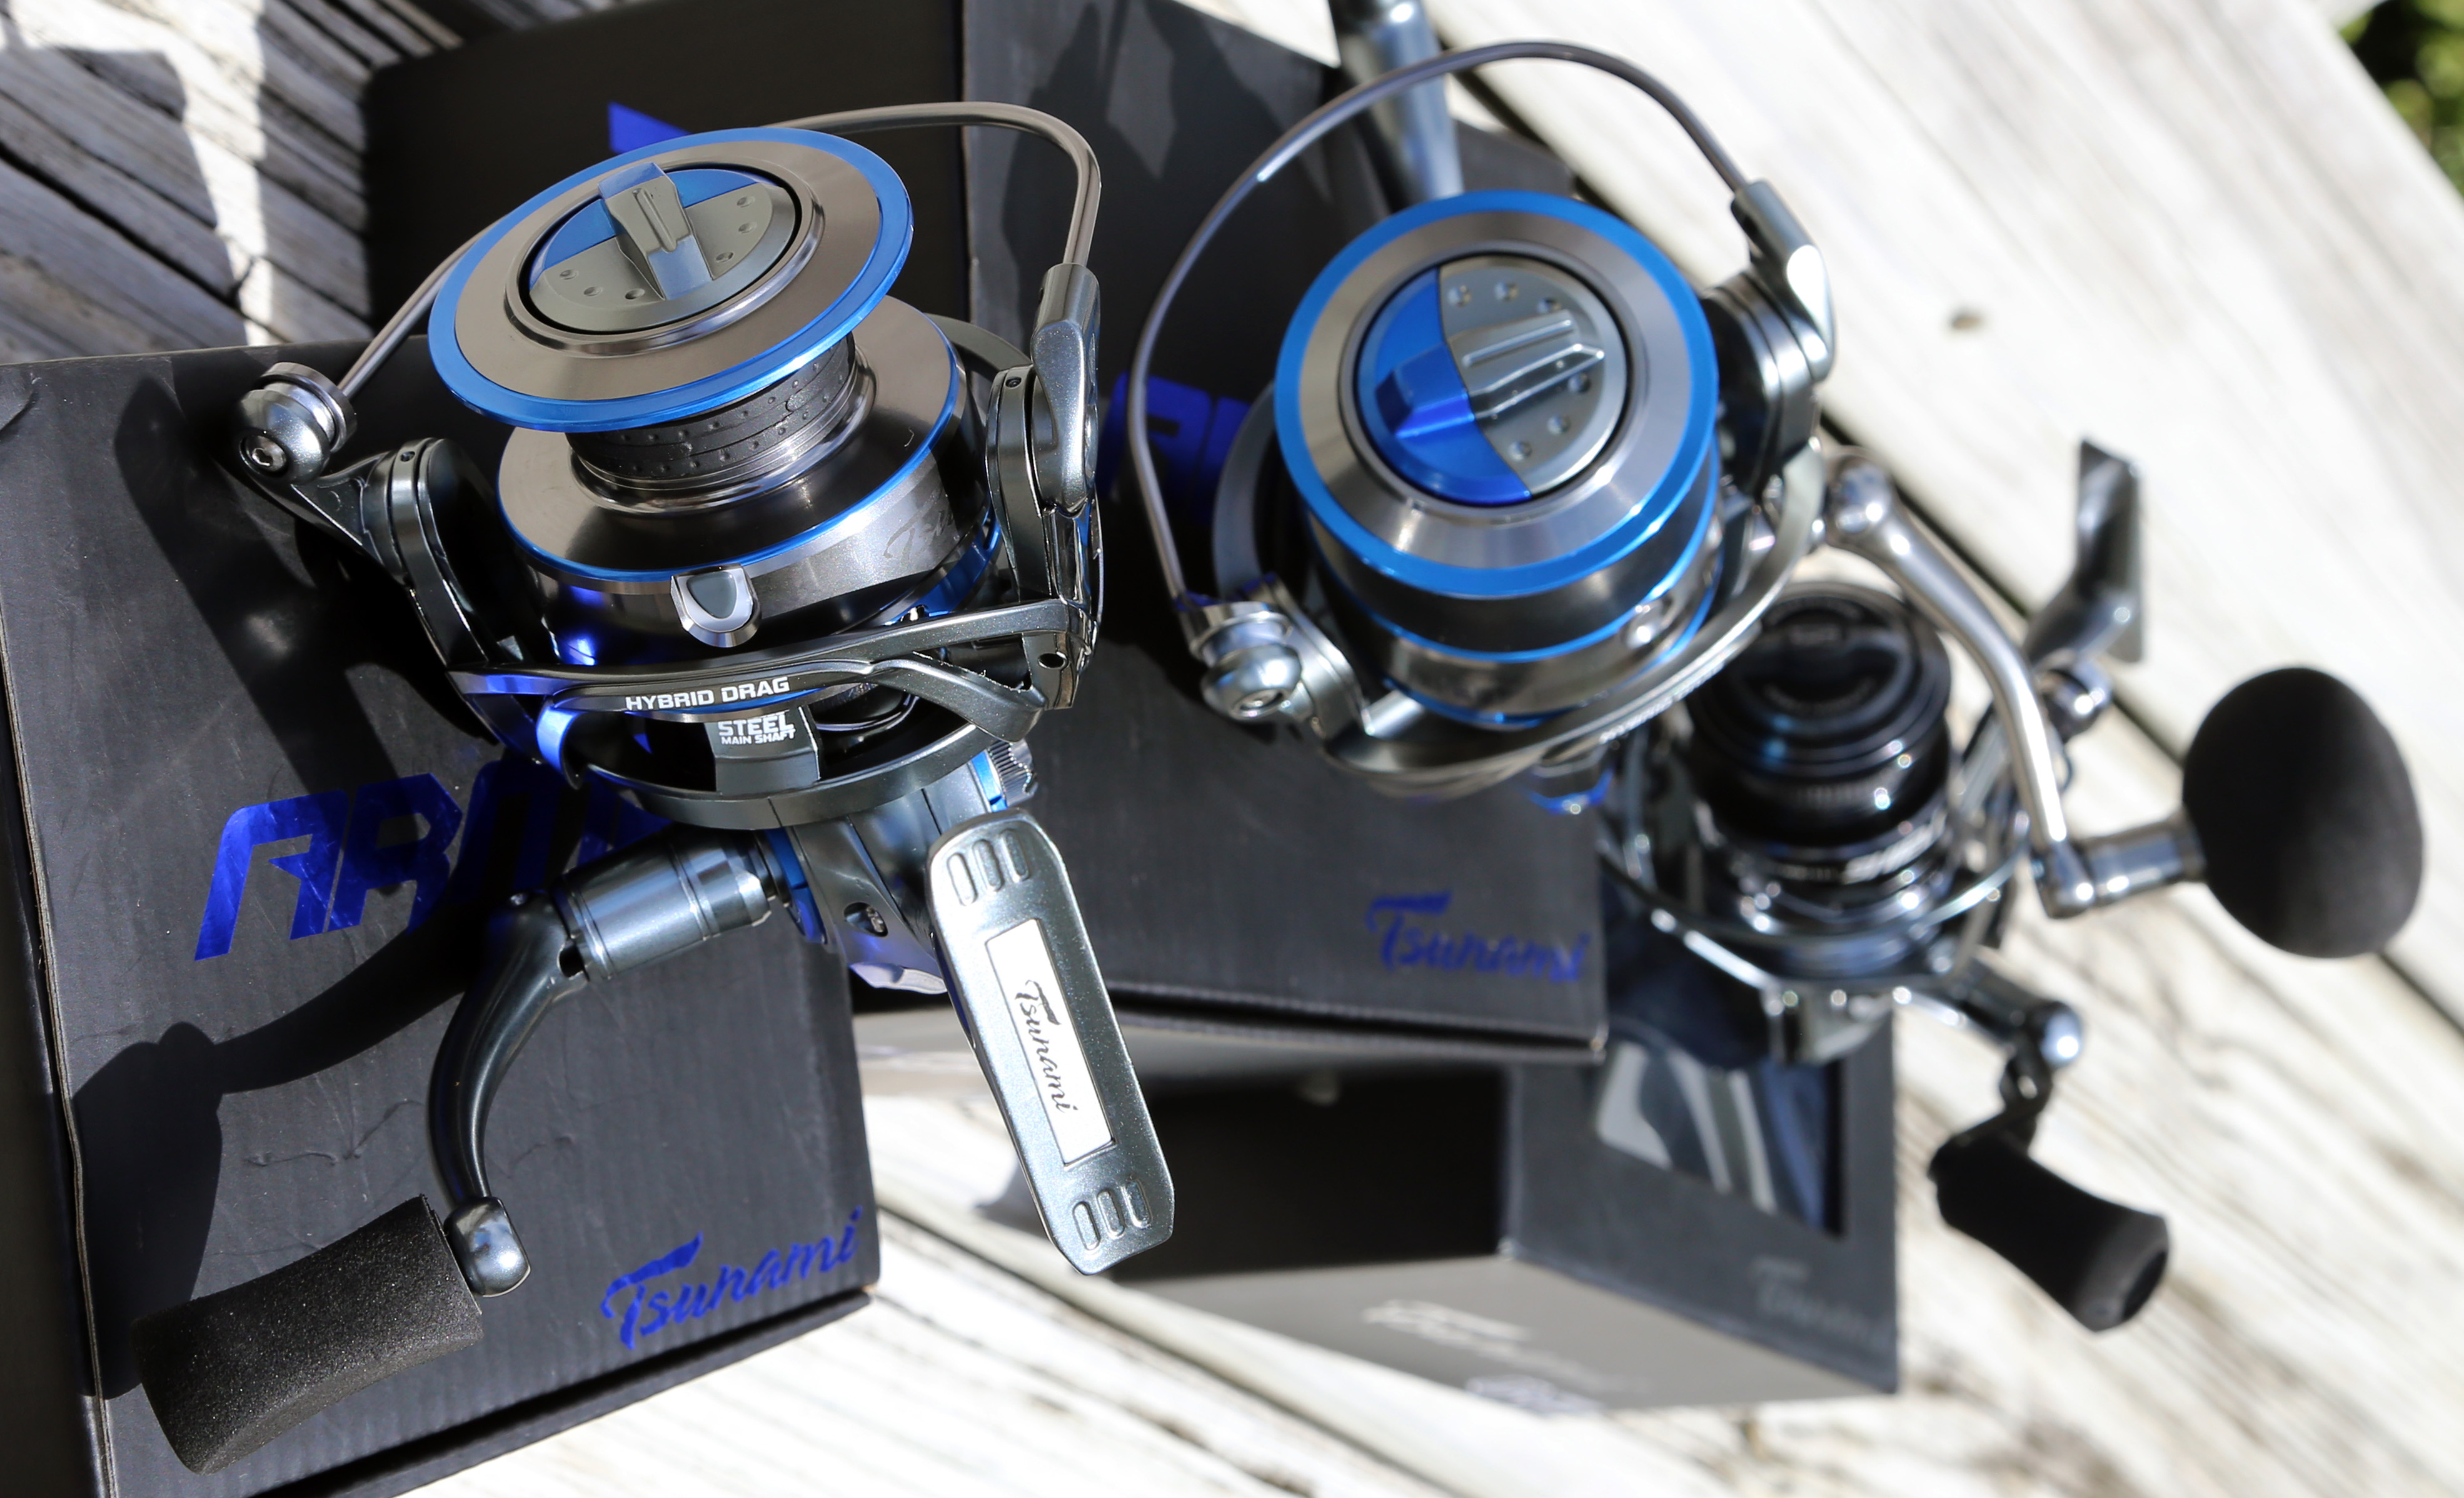 Tell Us Your Favorite Place to Fish and Win a Tsunami Reel